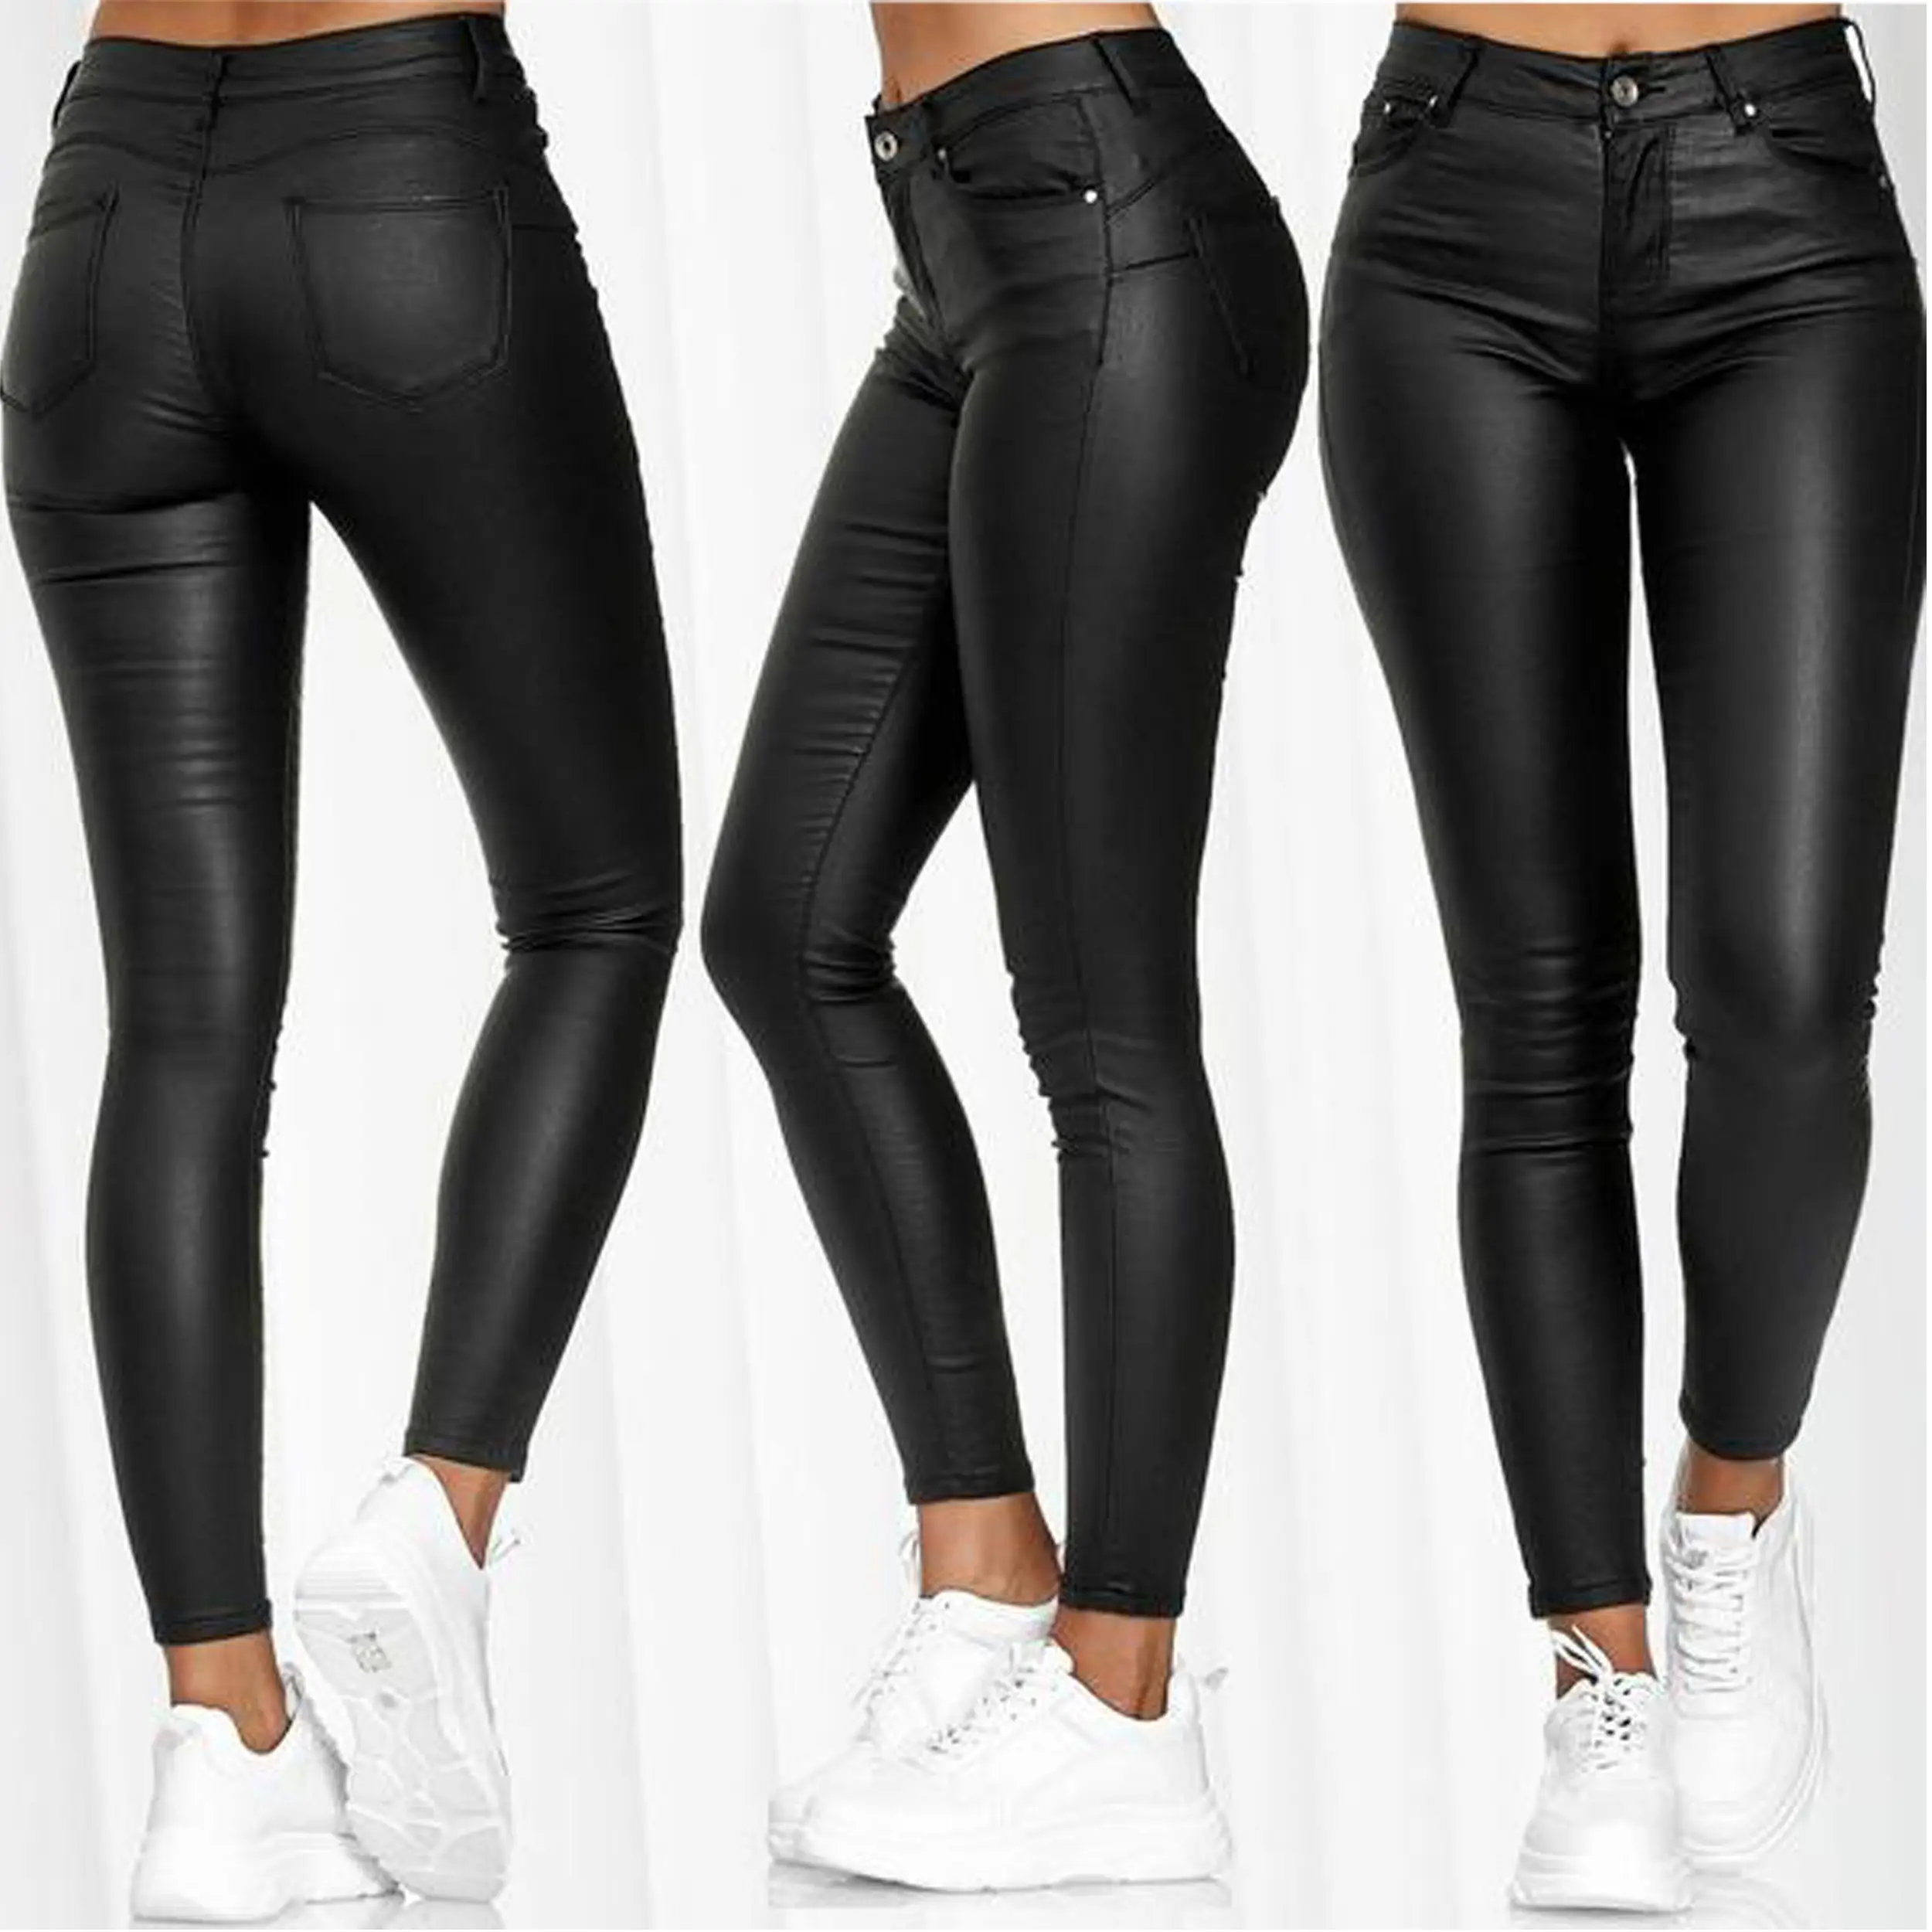 New style high quality slim fit straight leg ladies sexy leather skinny pants wholesale price for women